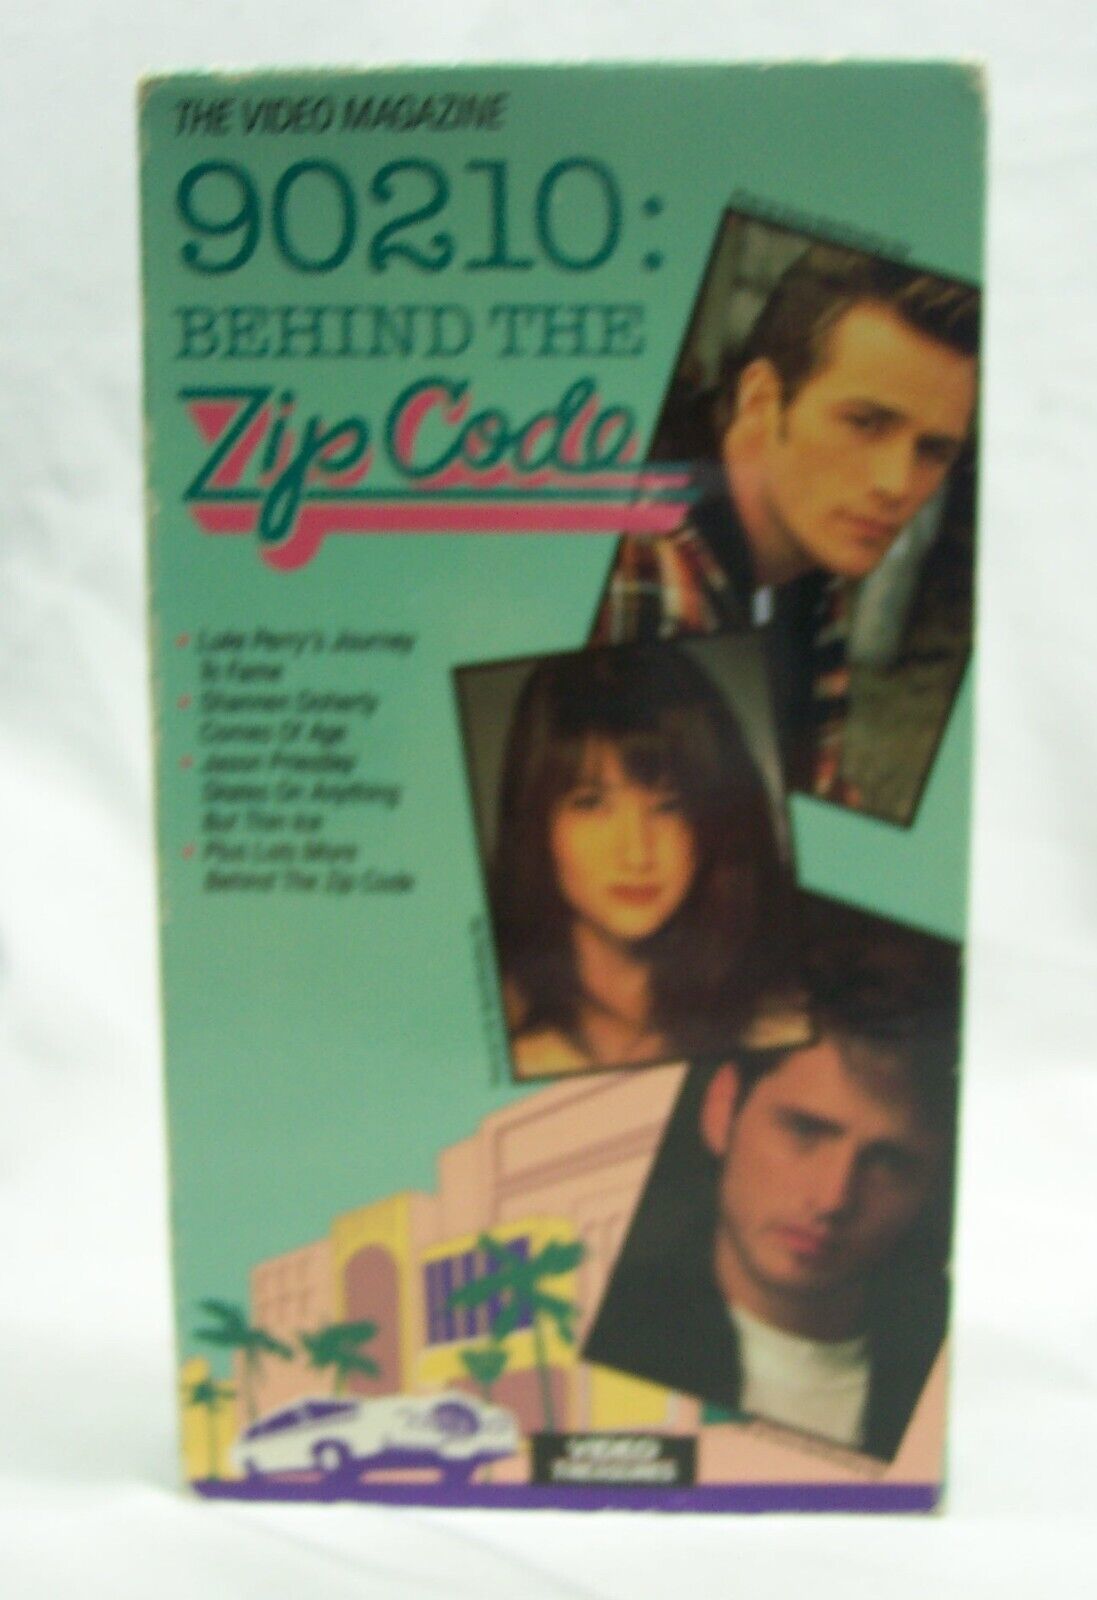 Primary image for Vintage 90210 Tv Show BEHIND THE ZIP CODE VHS VIDEO 1992 90's